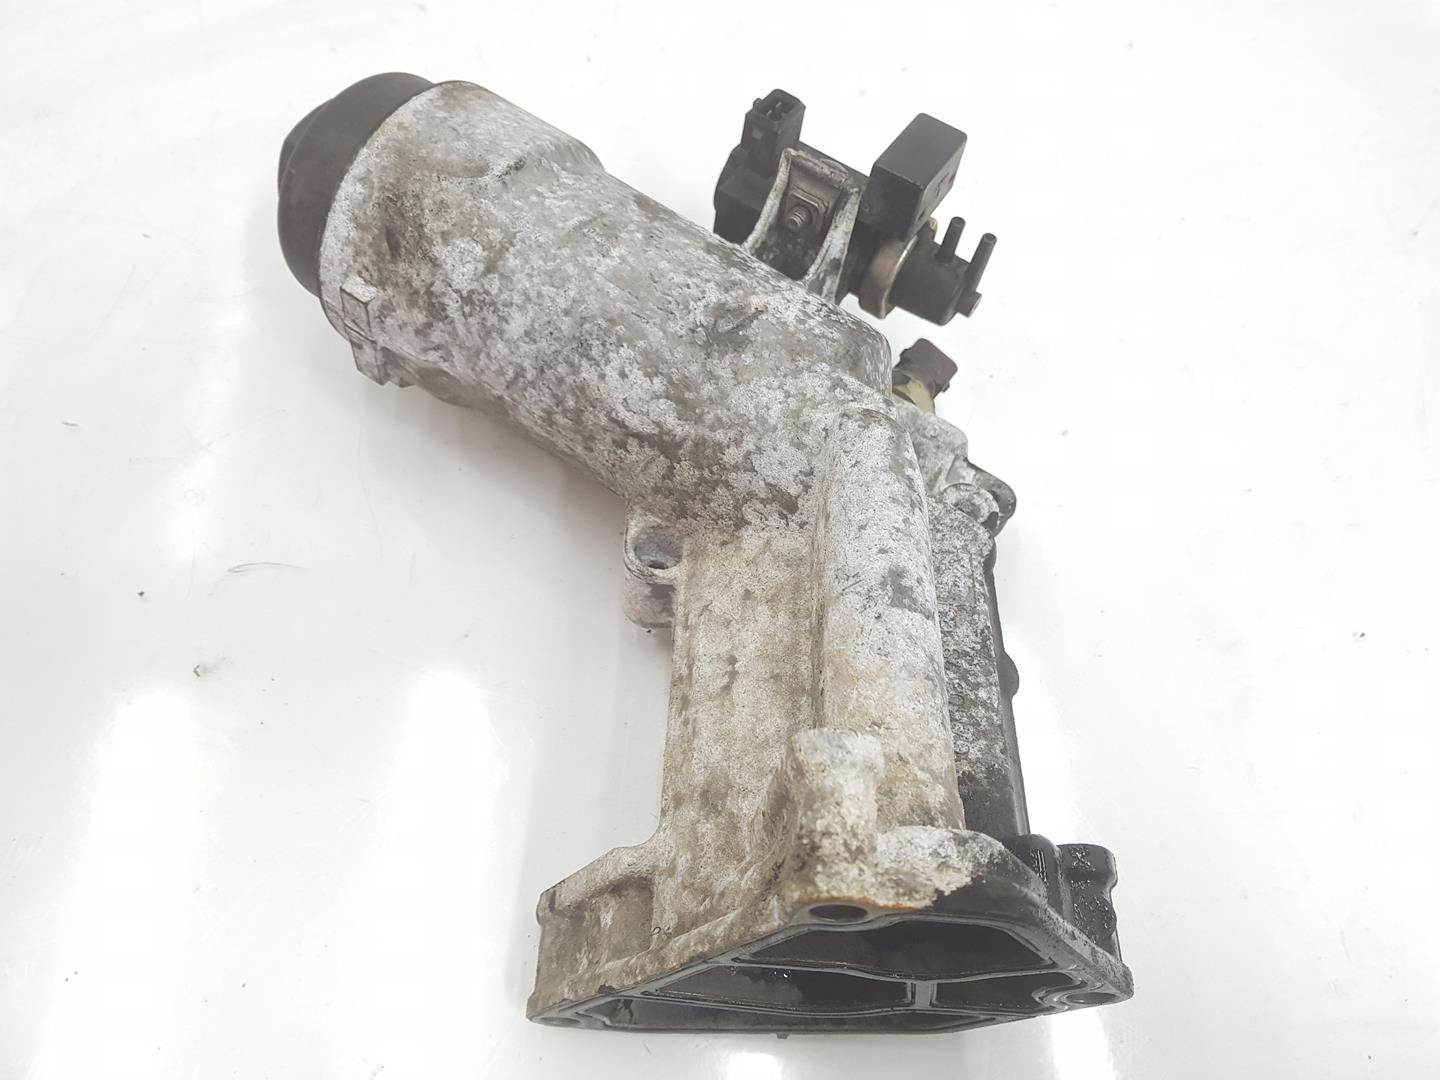 BMW 3 Series E46 (1997-2006) Other Engine Compartment Parts 7805407, 11427805407 24528512